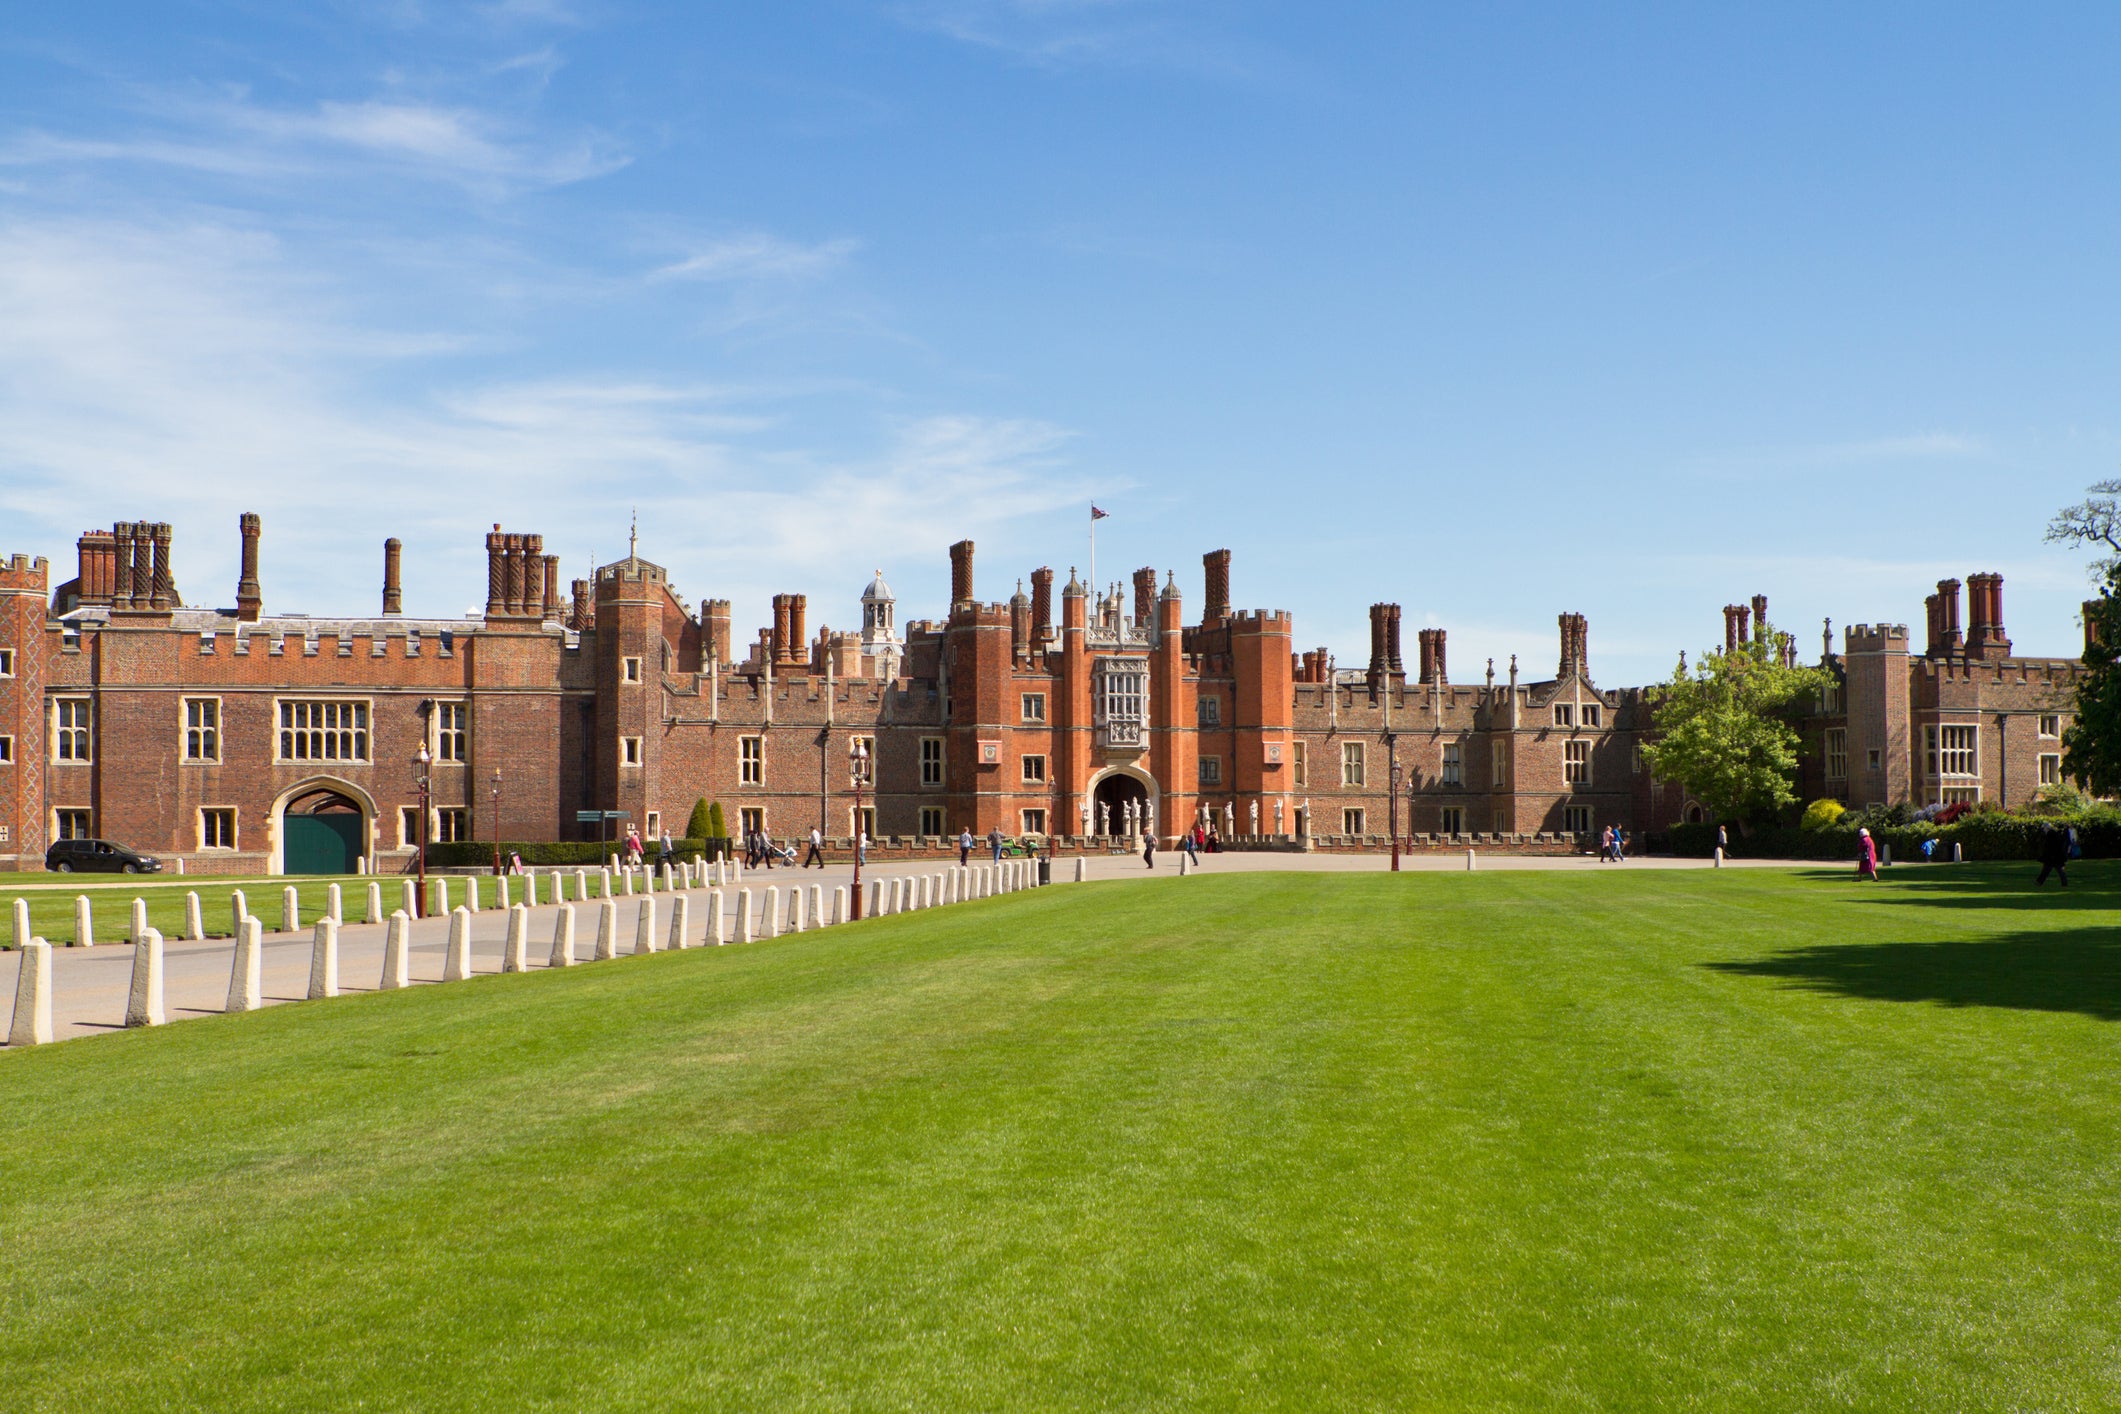 Photos of World War Two anti-invasion measures at Hampton Court Palace can be found using the online tool